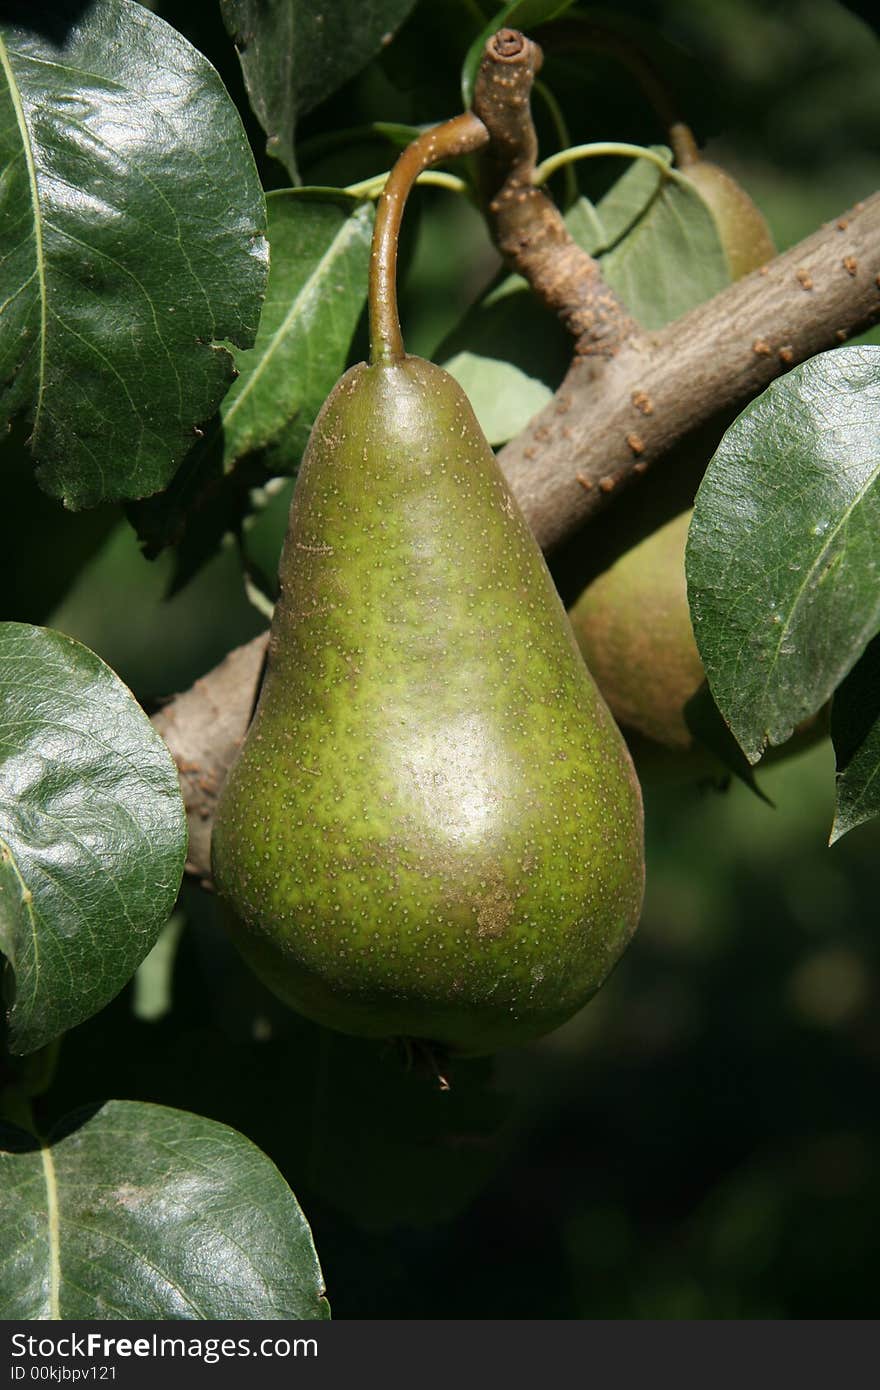 Single pear ripe amd ready for harvest in an orchard. Single pear ripe amd ready for harvest in an orchard.